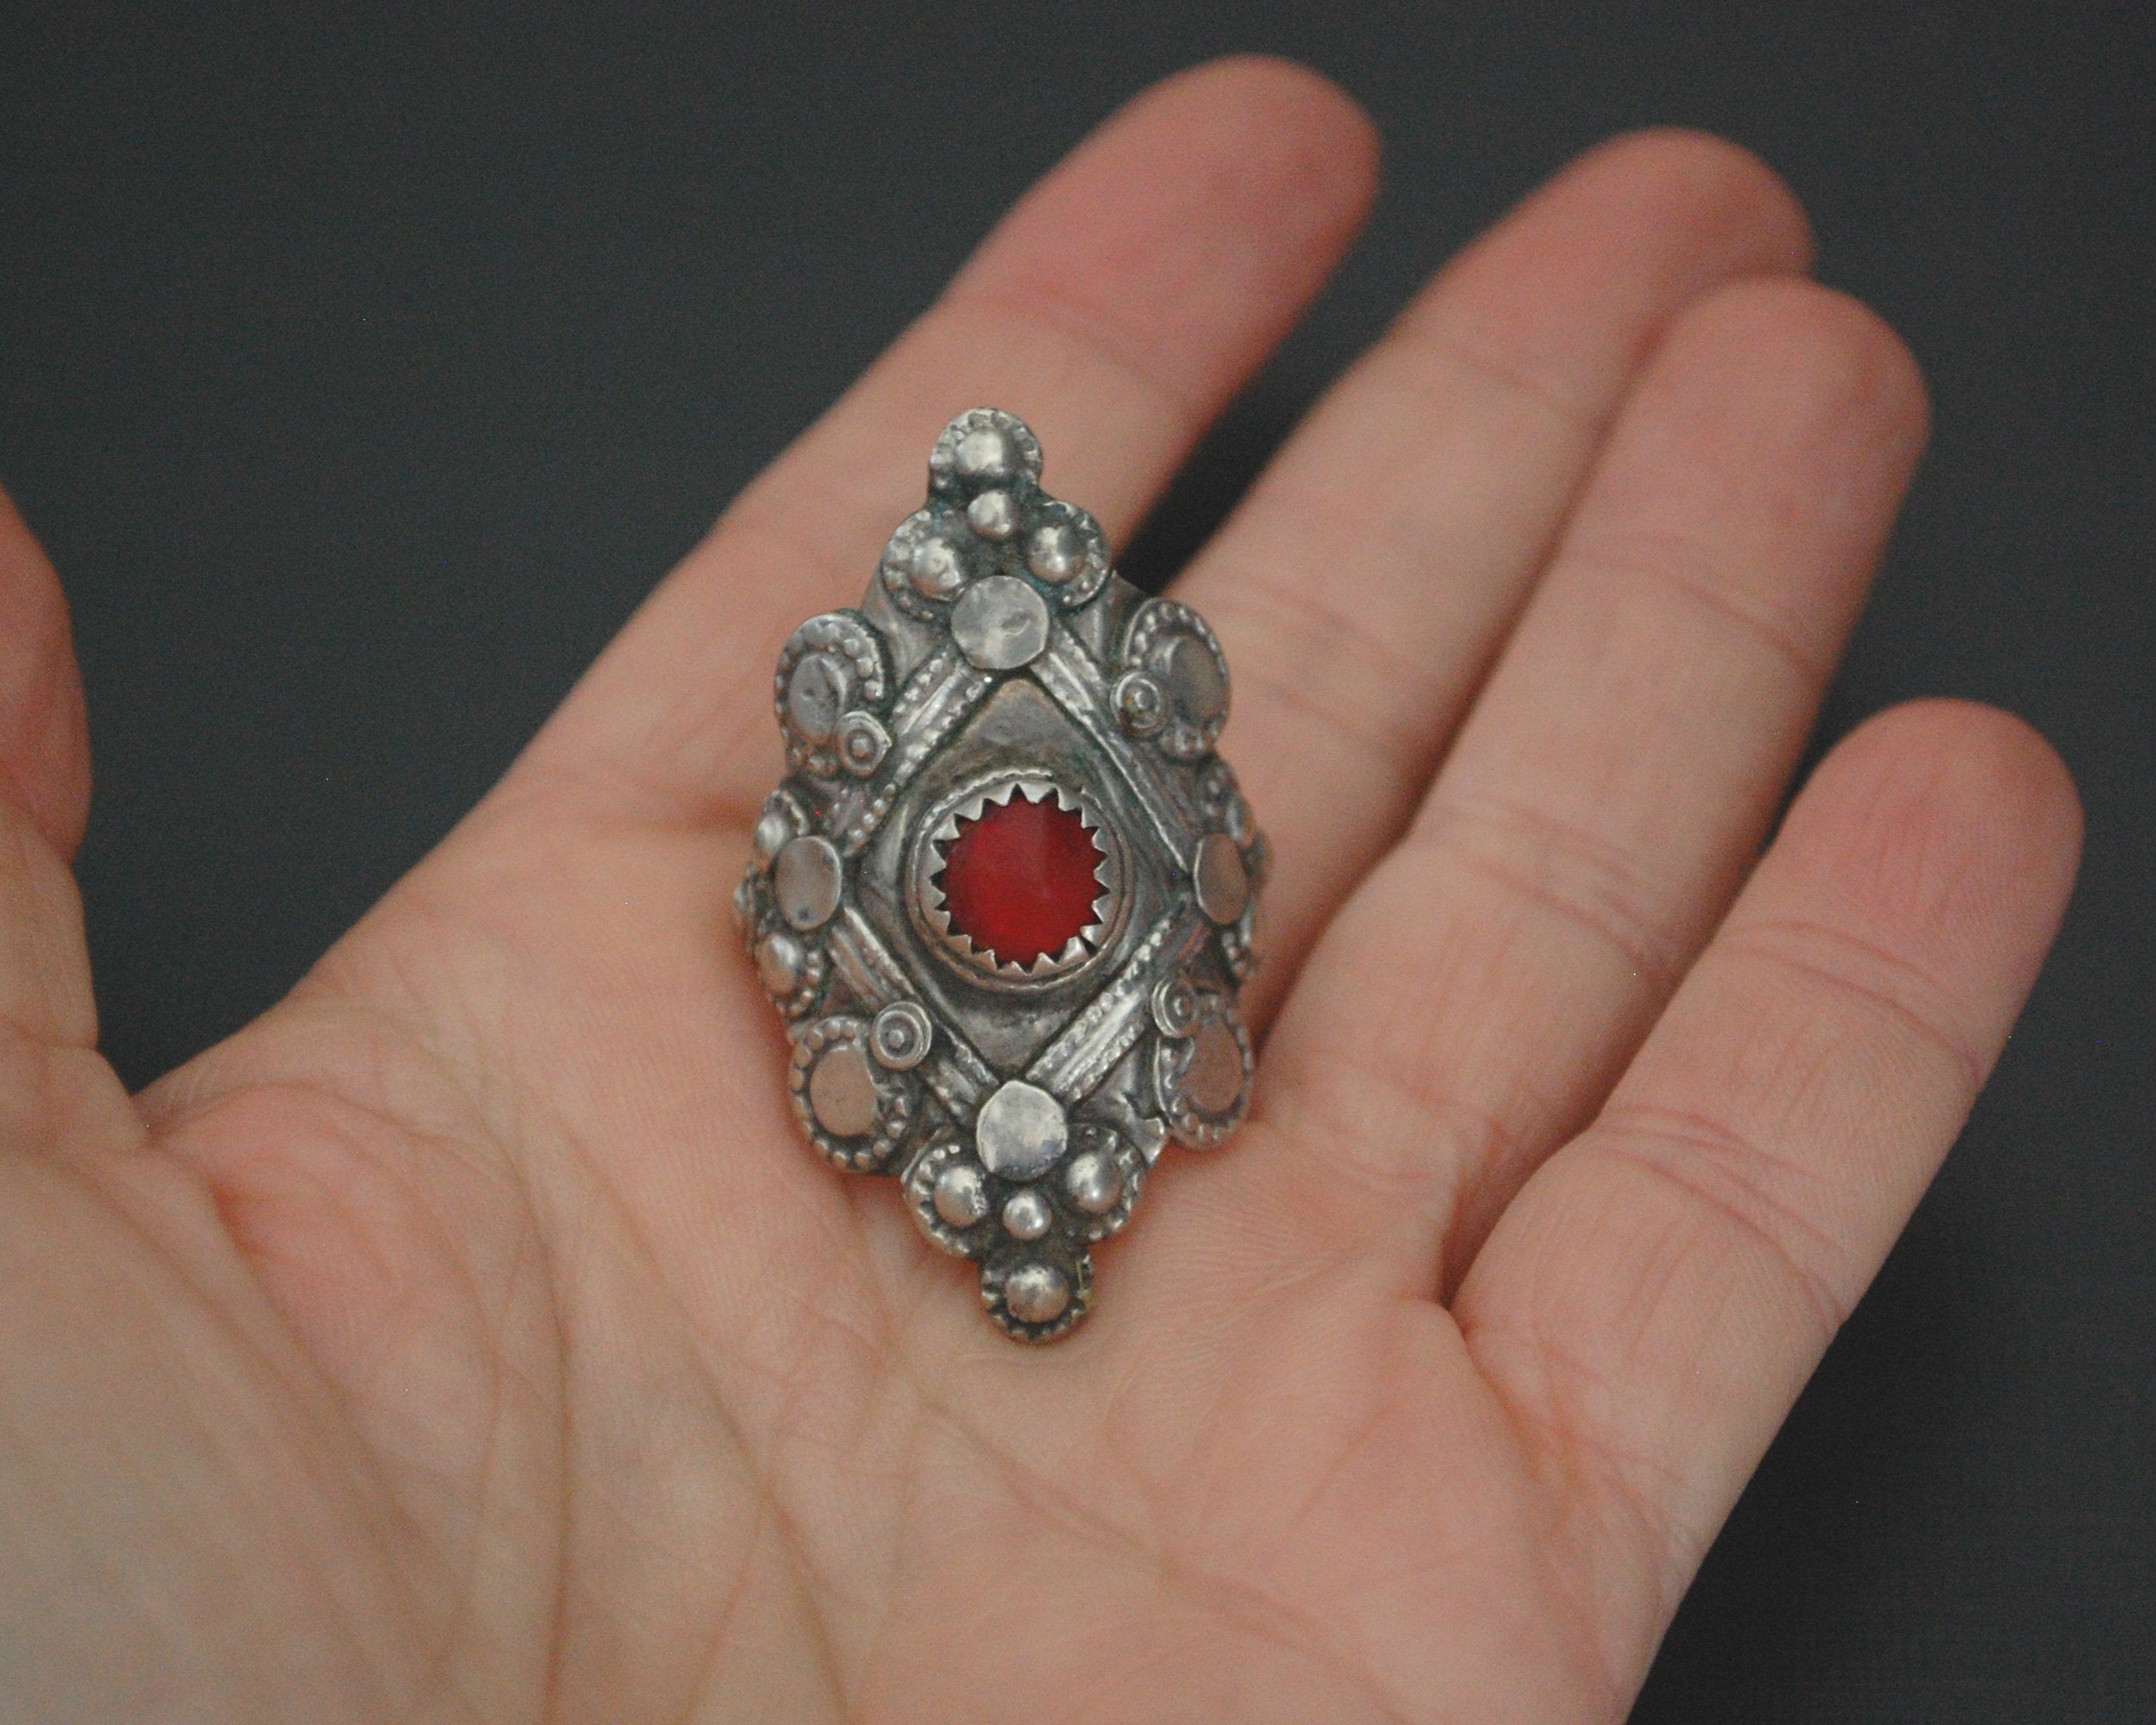 Afghani Tribal Silver Ring with Red Glass - Size 9